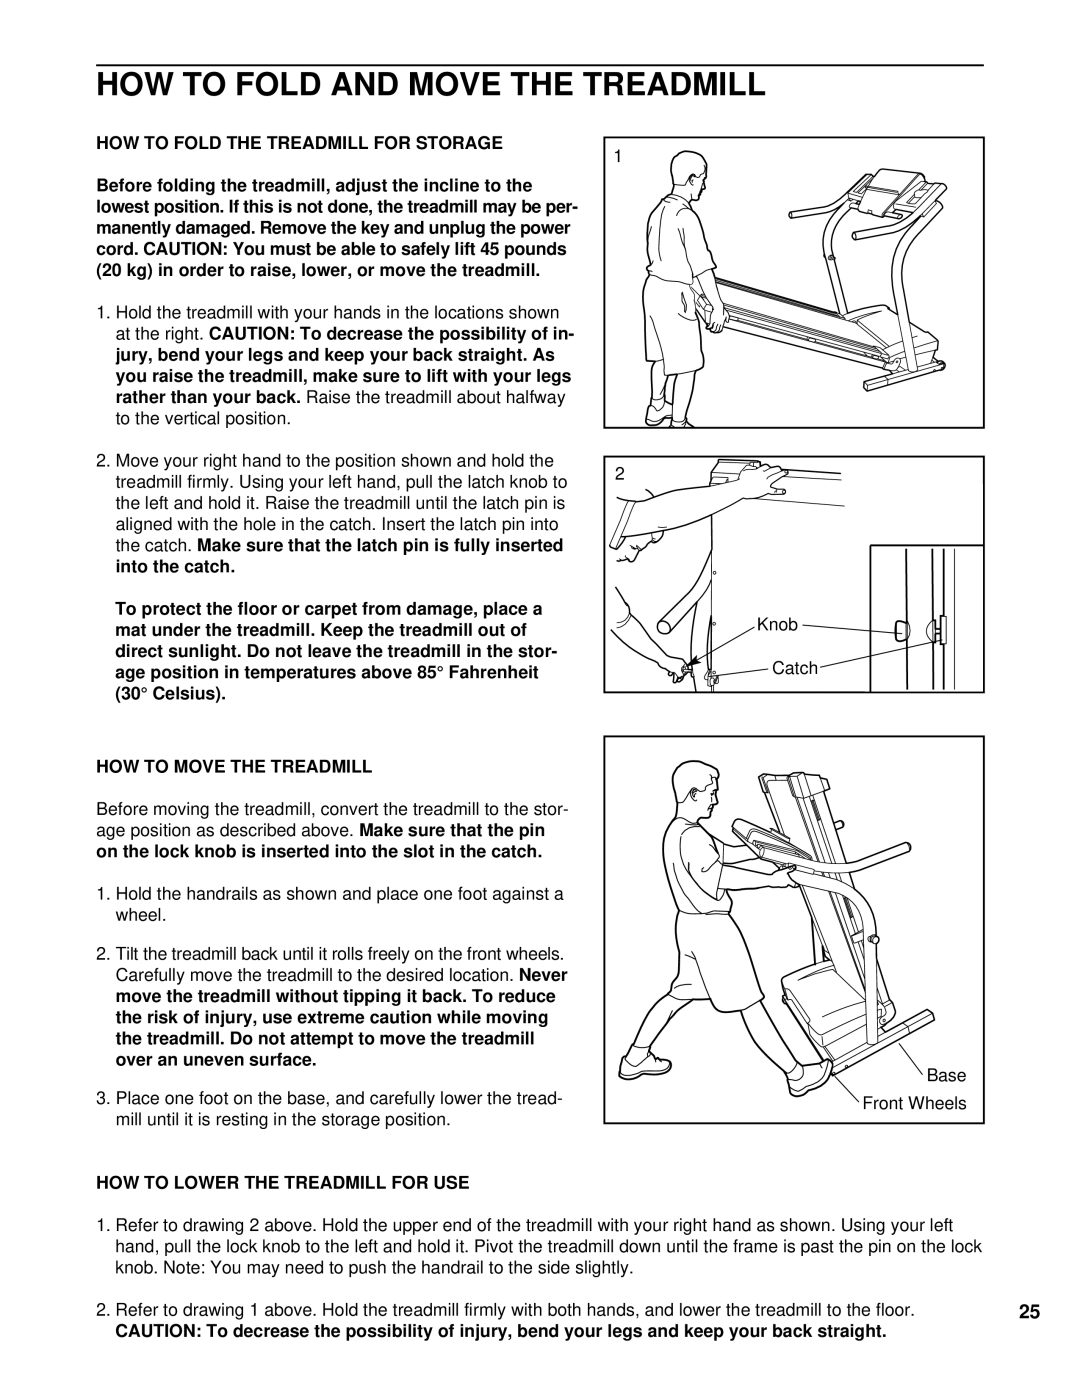 NordicTrack NCTL11990 HOW to Fold and Move the Treadmill, HOW to Fold the Treadmill for Storage, HOW to Move the Treadmill 